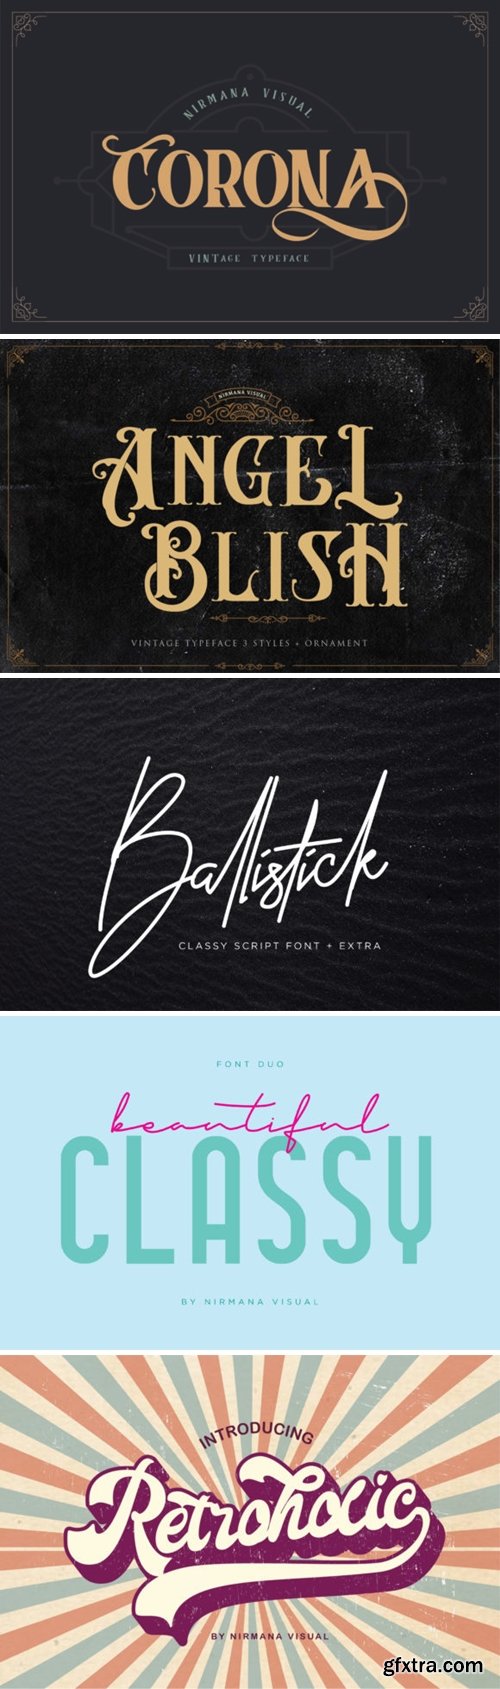 6 Sophisticated Fonts